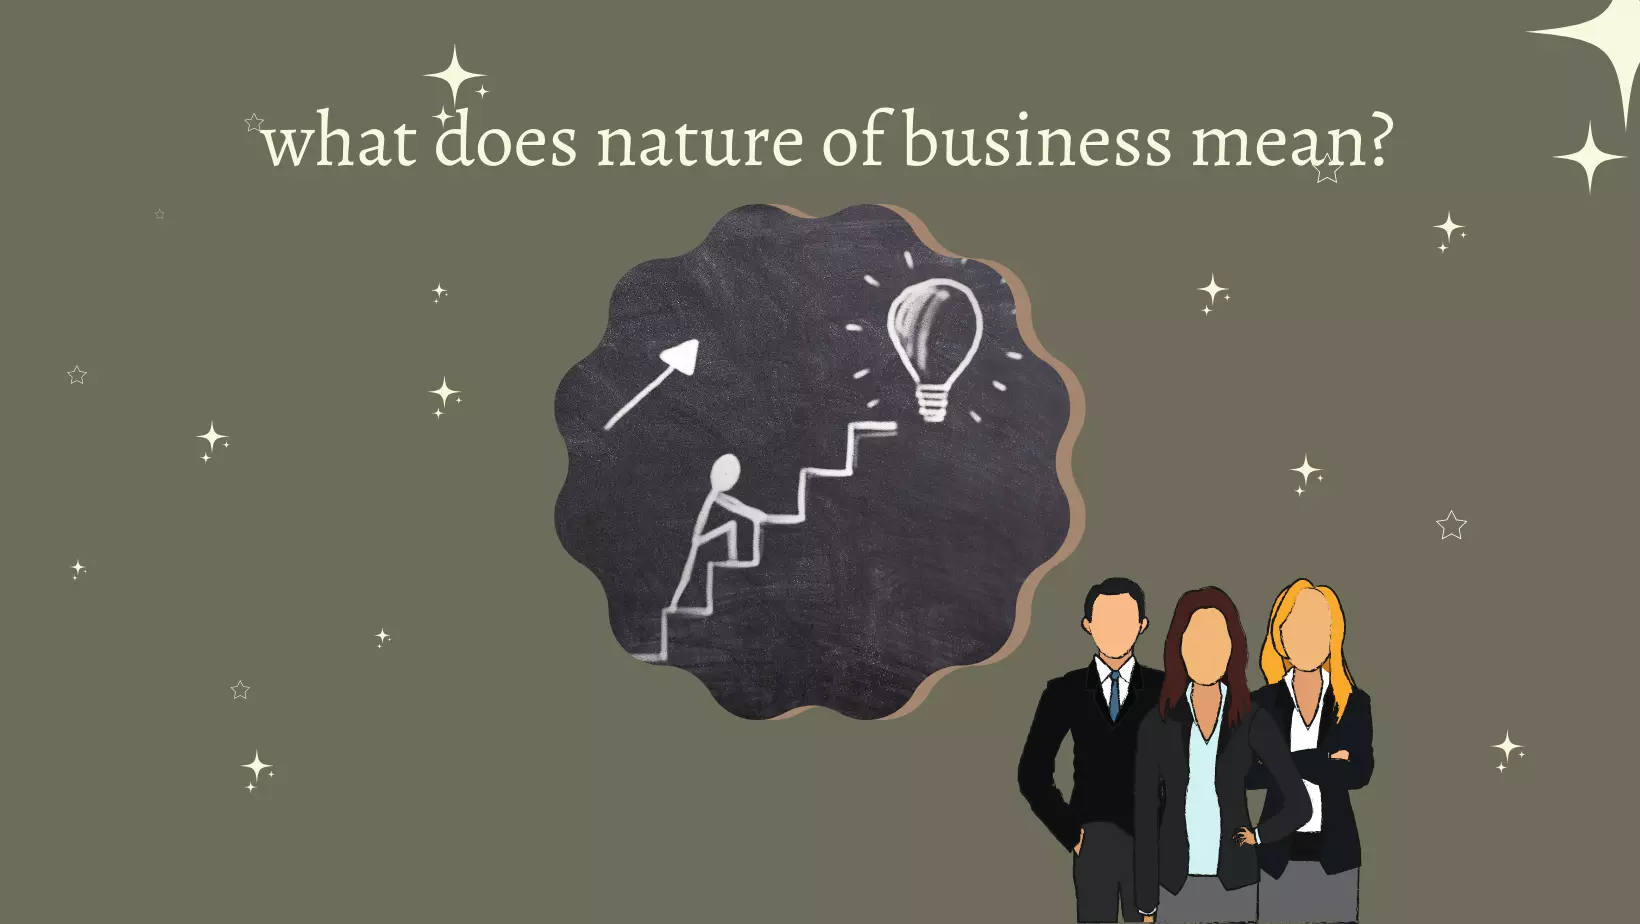 "Nature of Business explained"